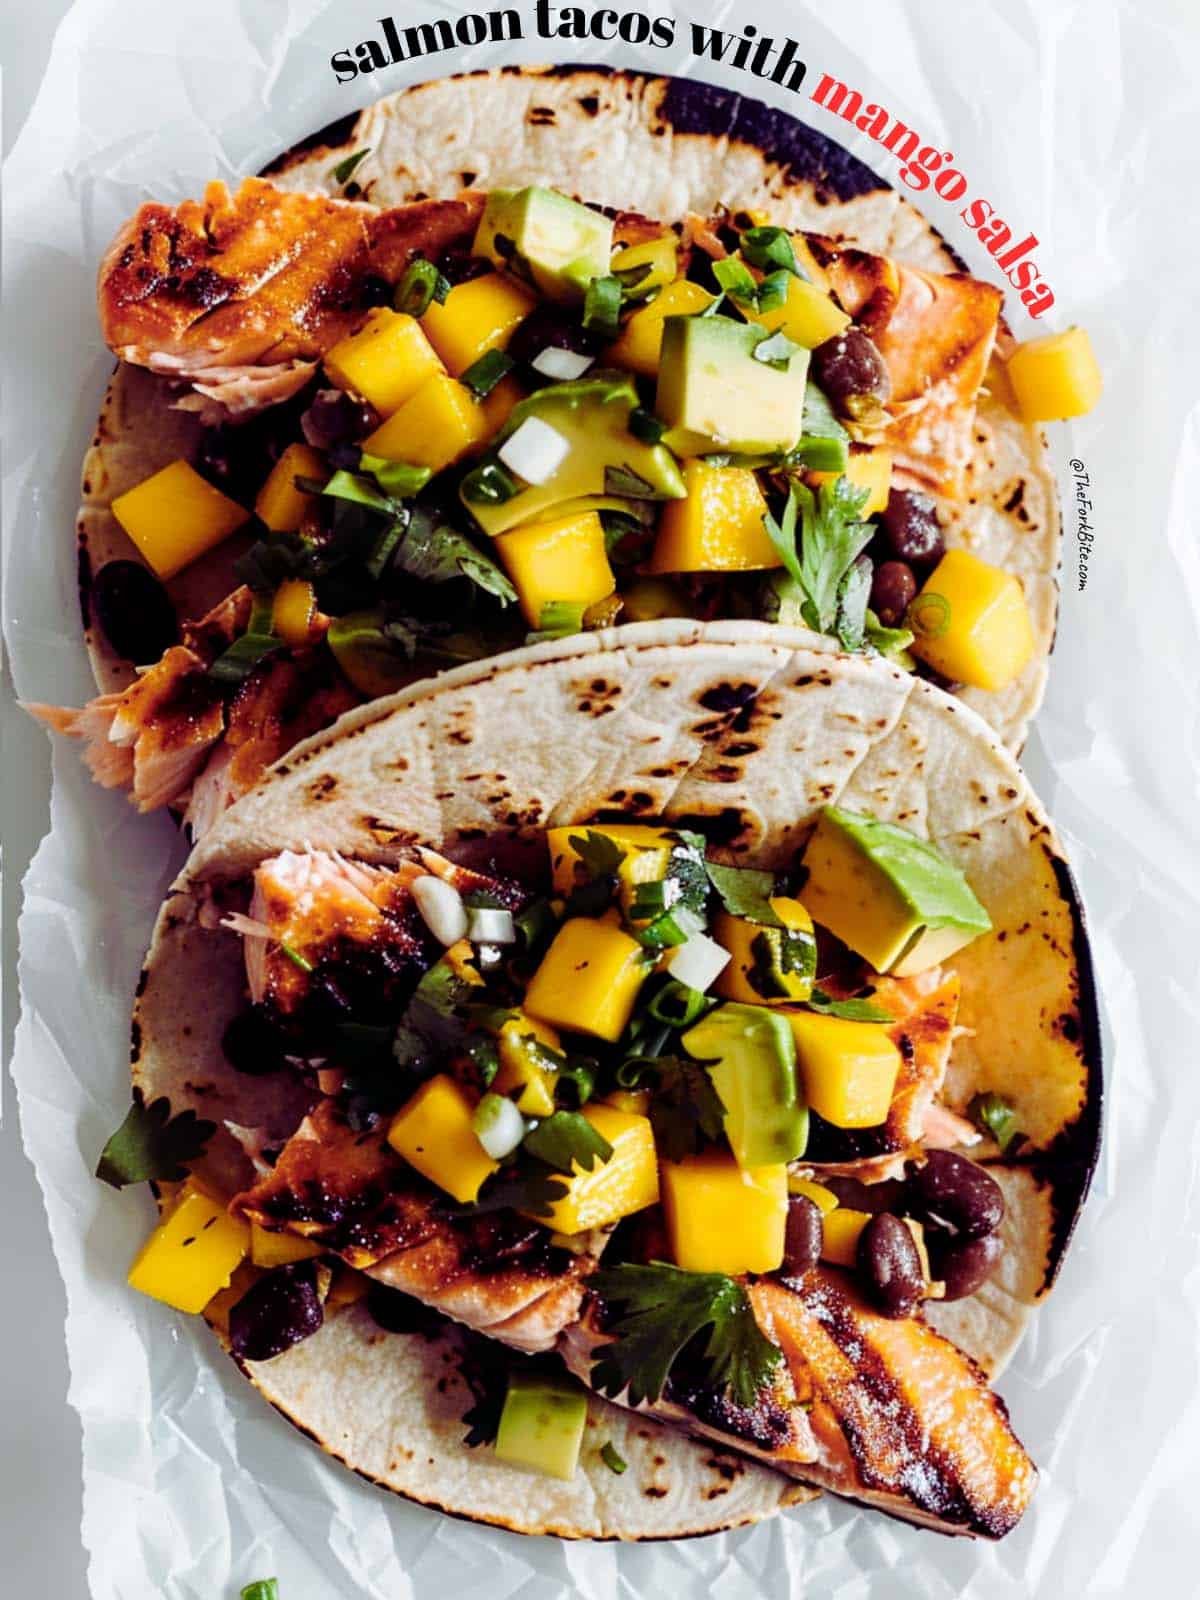 Assembled air fryer salmon tacos with corn tortillas, flaky salmon, and mango salsa.